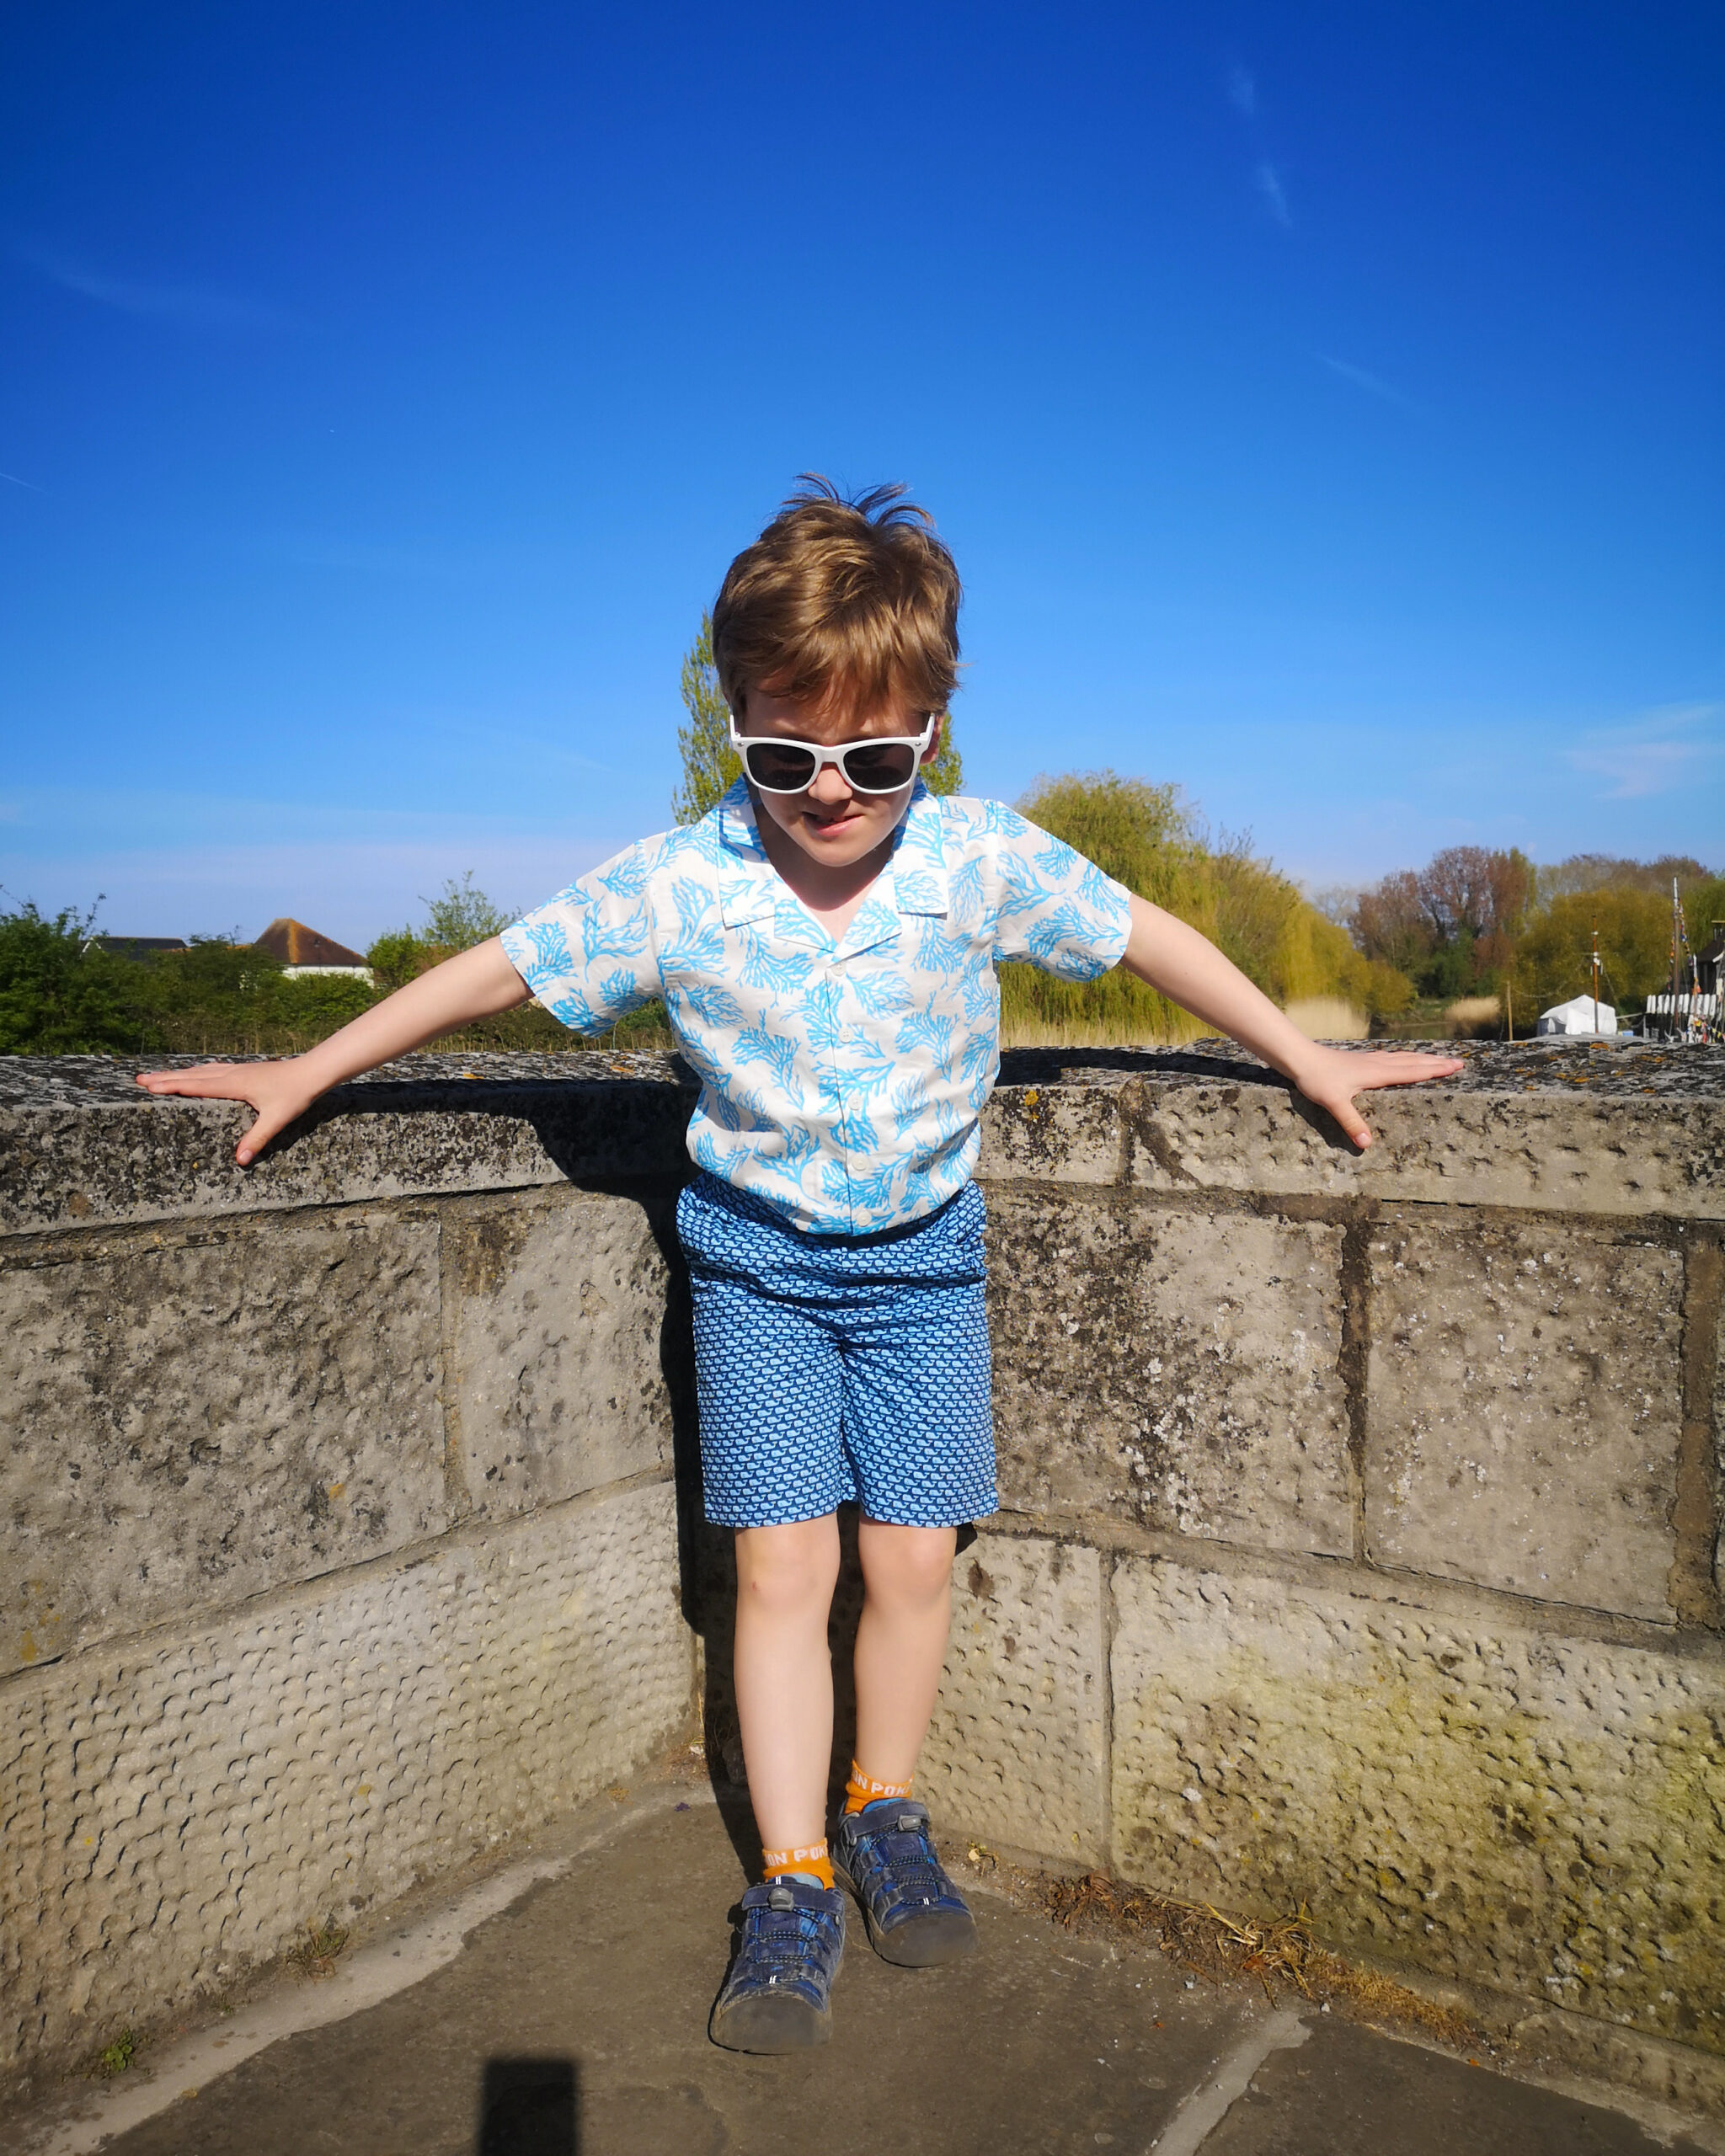 Rachel Riley SS23 Collection, Childrenswear, Luxury Brand, British Design, Rachel Riley, Kidswear, Vintage Vibes, 50s & 60s, Win, Fashion giveaway, the Frenchie Mummy, Win, Competition, Baby & Kids Clothing, London, Designed in England